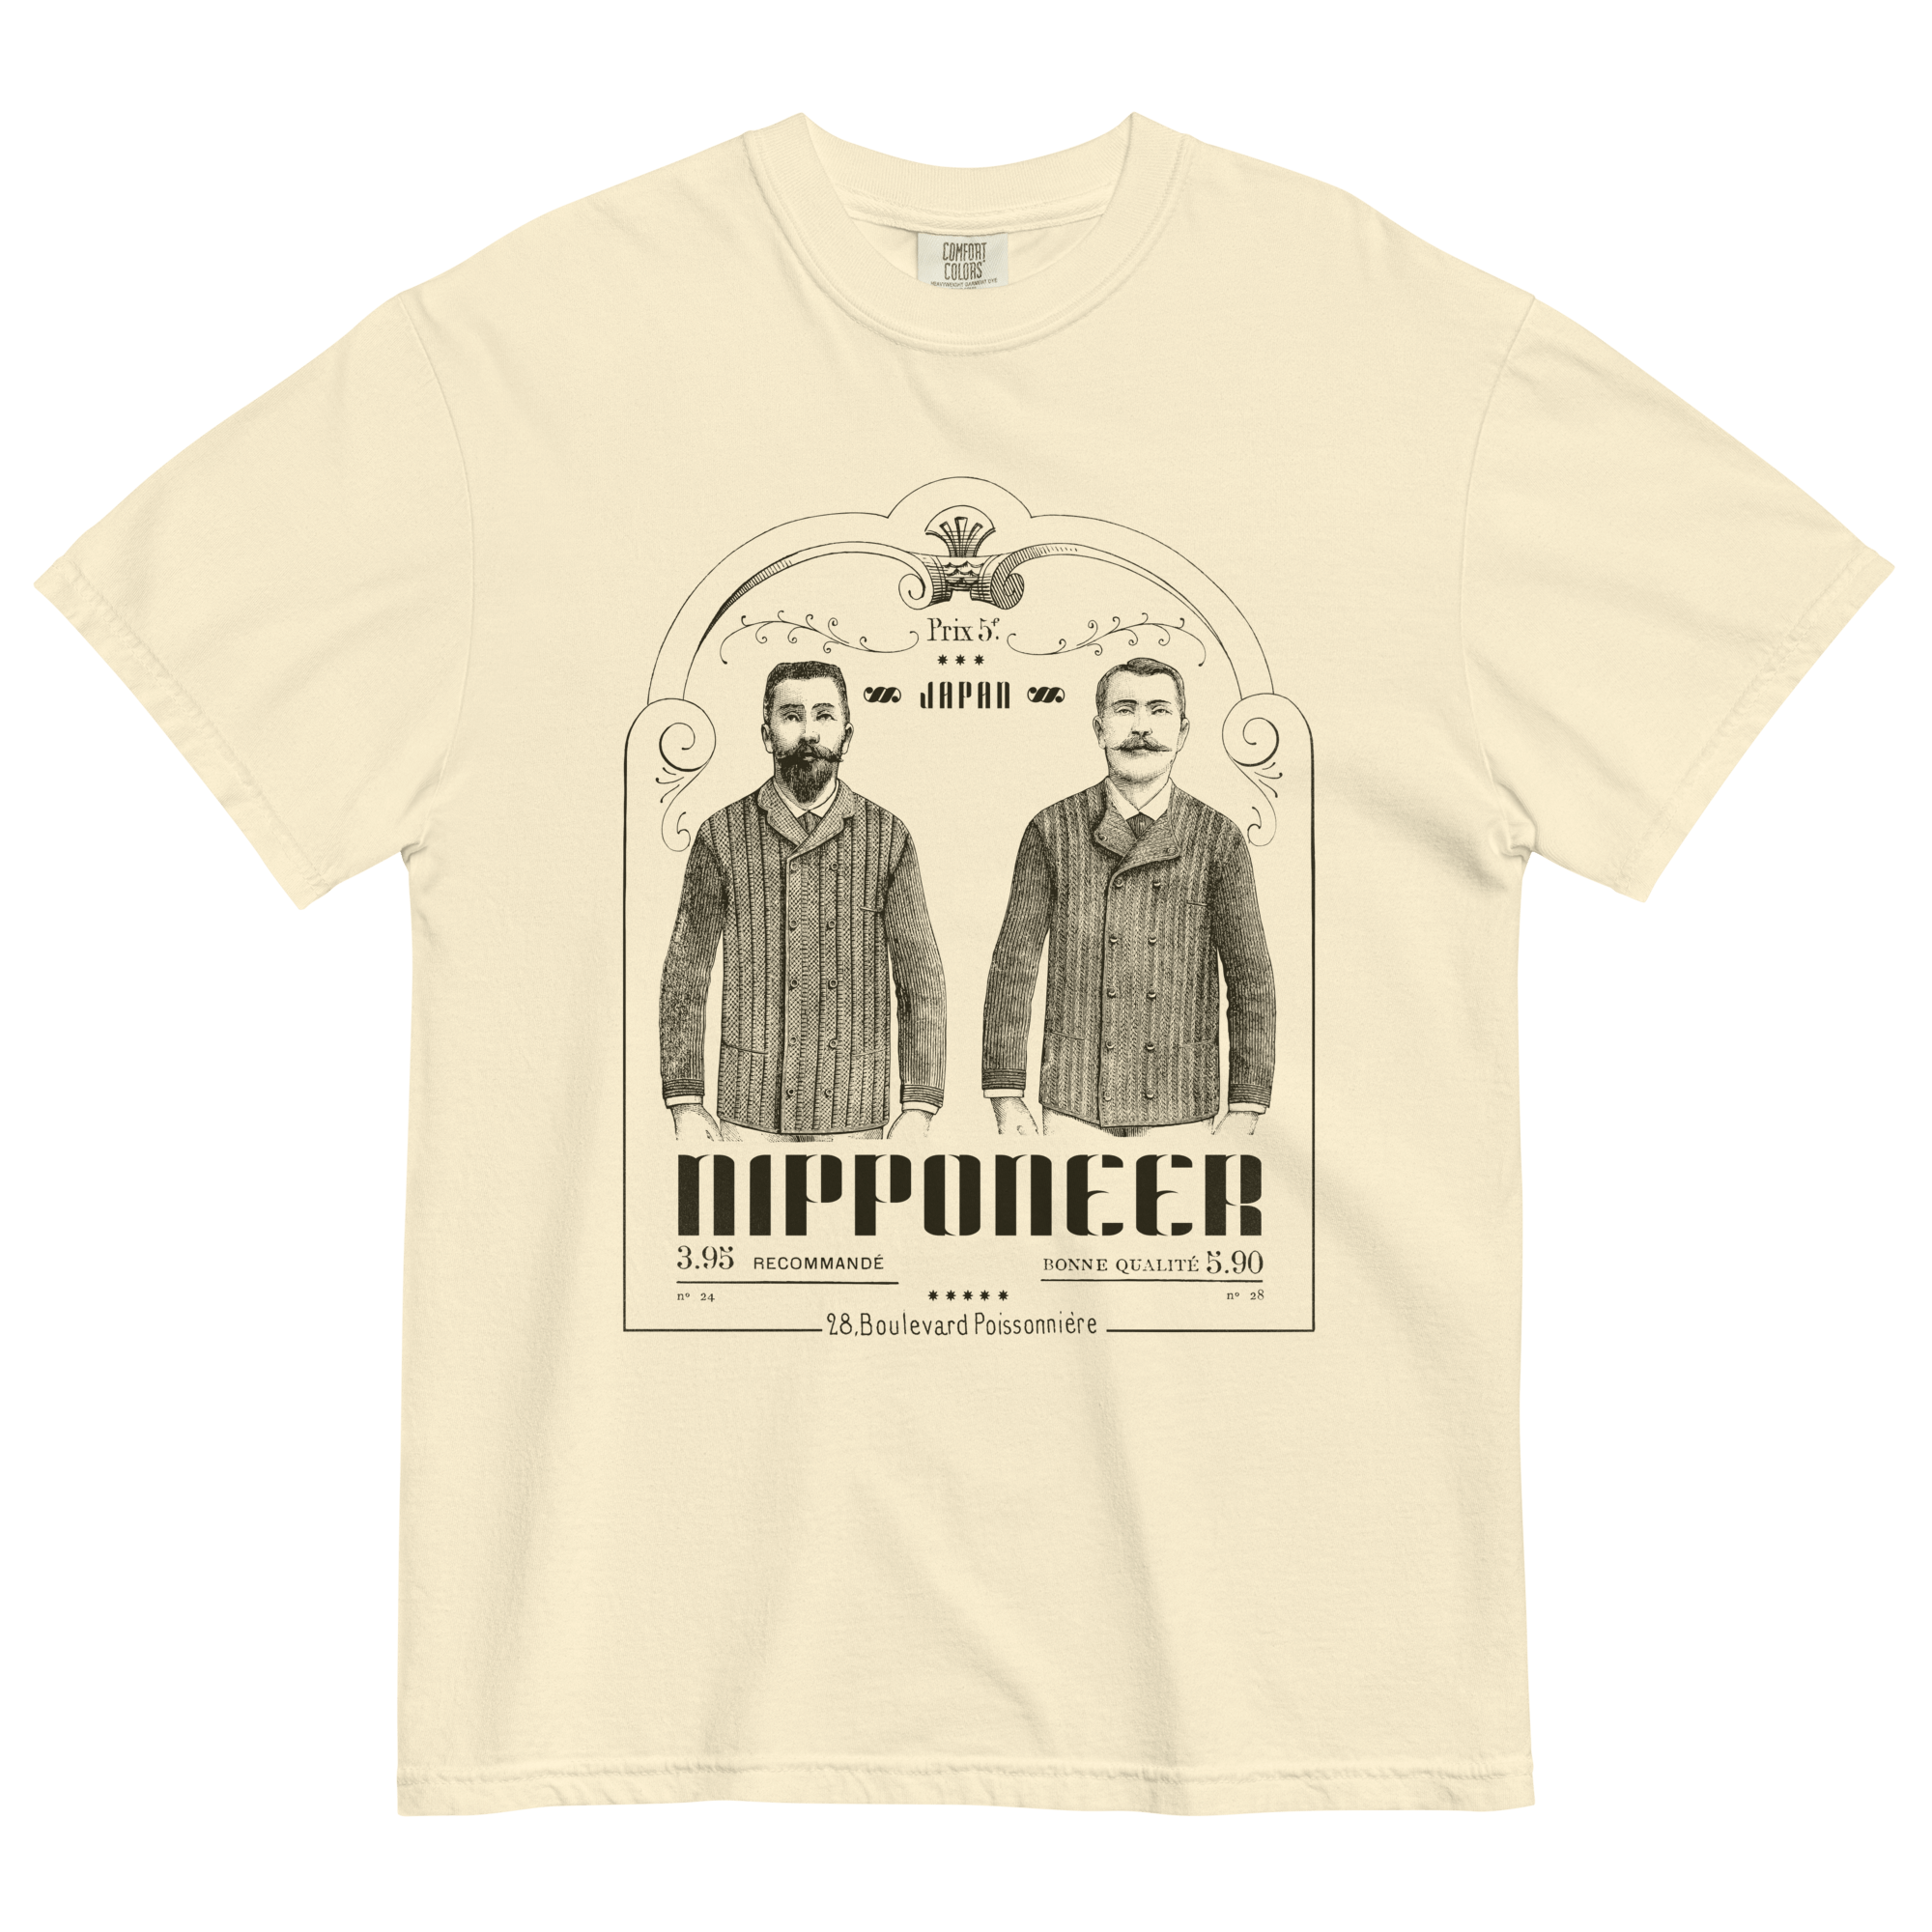 Nipponeer Vtg T-shirtRock your look with the Nipponeer Vtg T-shirt! Perfectly comfy, 100% cotton, relaxed fit. Dare to be distinct. Shop now for style that speaks! • 100% ring-spun cotton • Fabric weight: 6.1 oz/yd² (206.8 g/m²) • Garment-dyed • Relaxed f